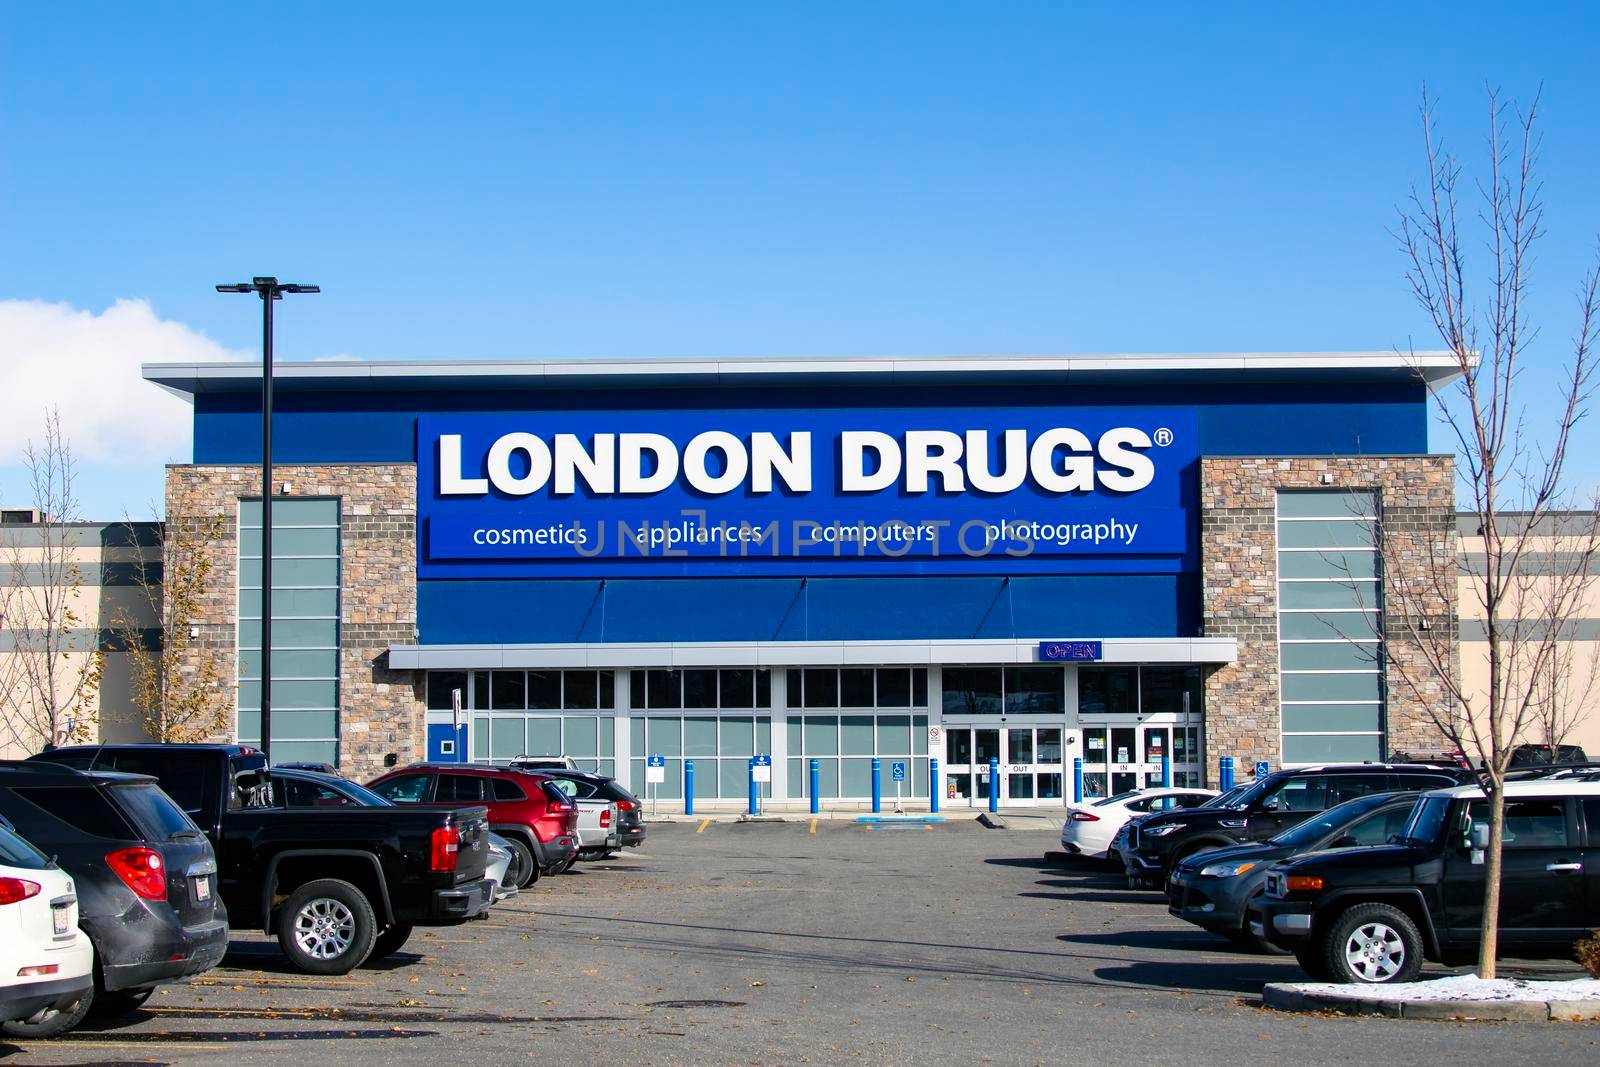 Calgary Alberta, Canada. Oct 17, 2020. London Drugs a Canadian retail store with headquarters in Richmond, British Columbia. Focus is on pharmaceuticals, electronics, housewares and cosmetics, with a limited selection of grocery items. by oasisamuel